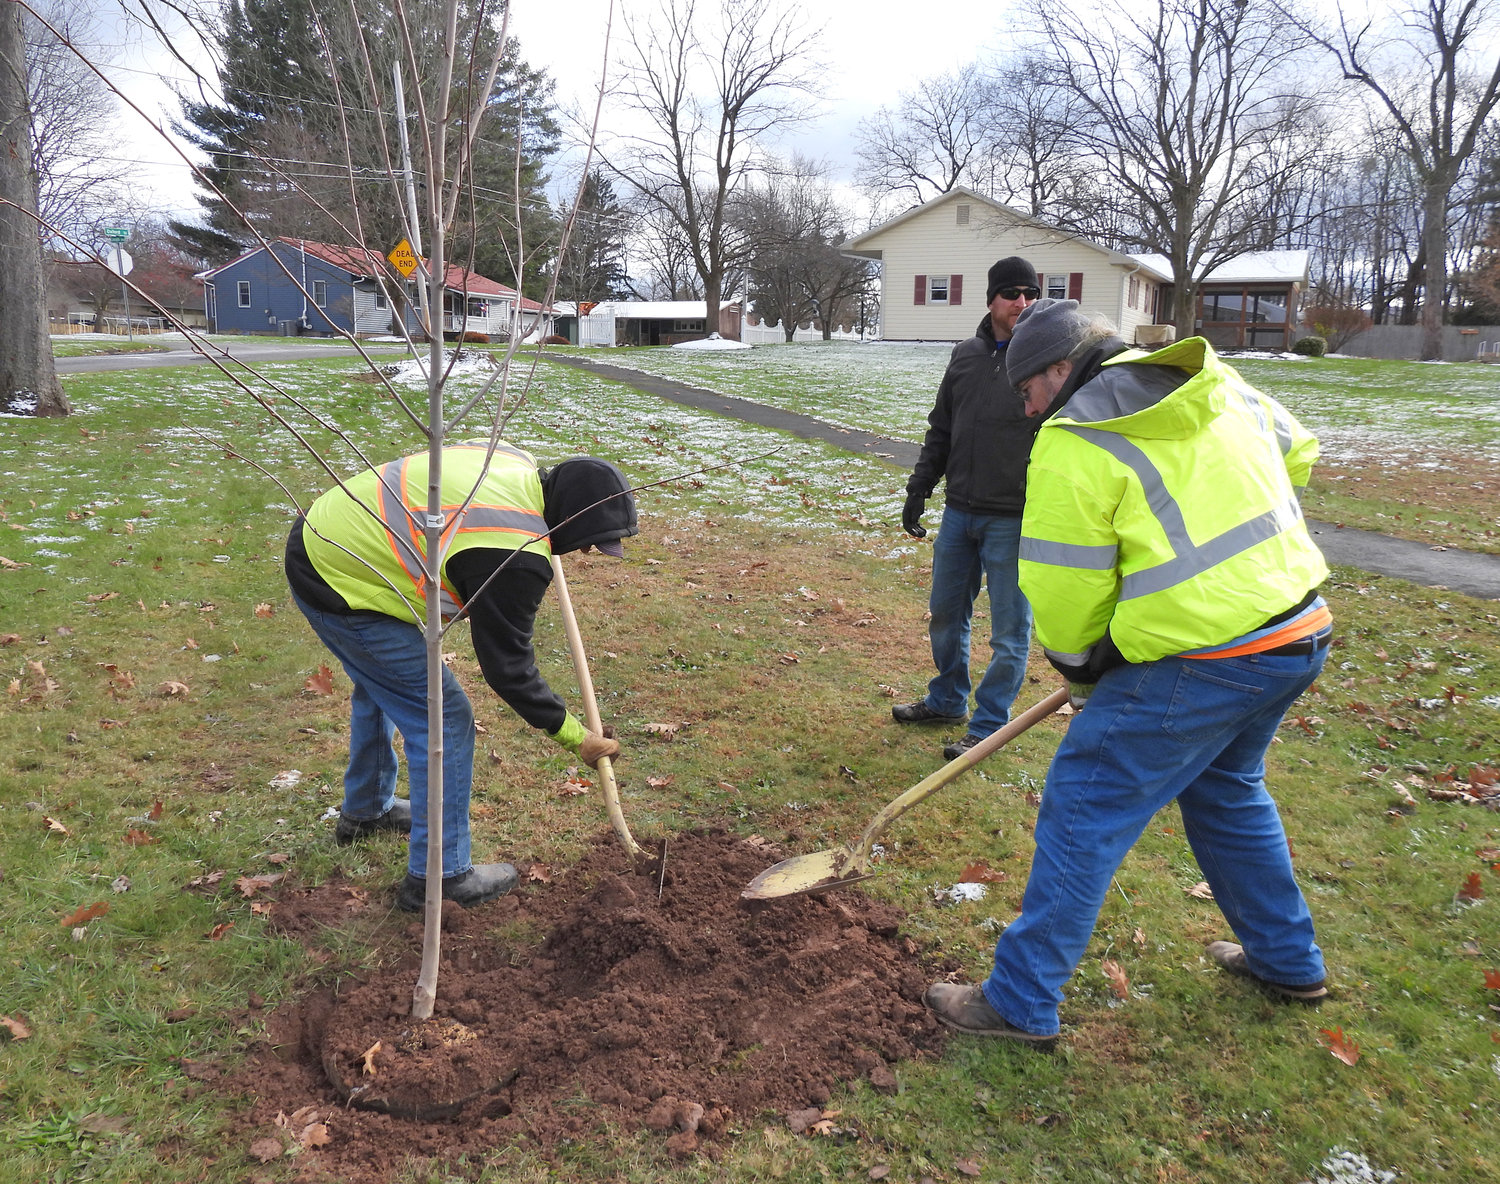 A NEW MAPLE — The Oneida City Department of Public Works plants a new maple tree in Lincoln Park on Tuesday, keeping their Tree City USA commitment and replacing trees that were plagued by emerald ash borers.